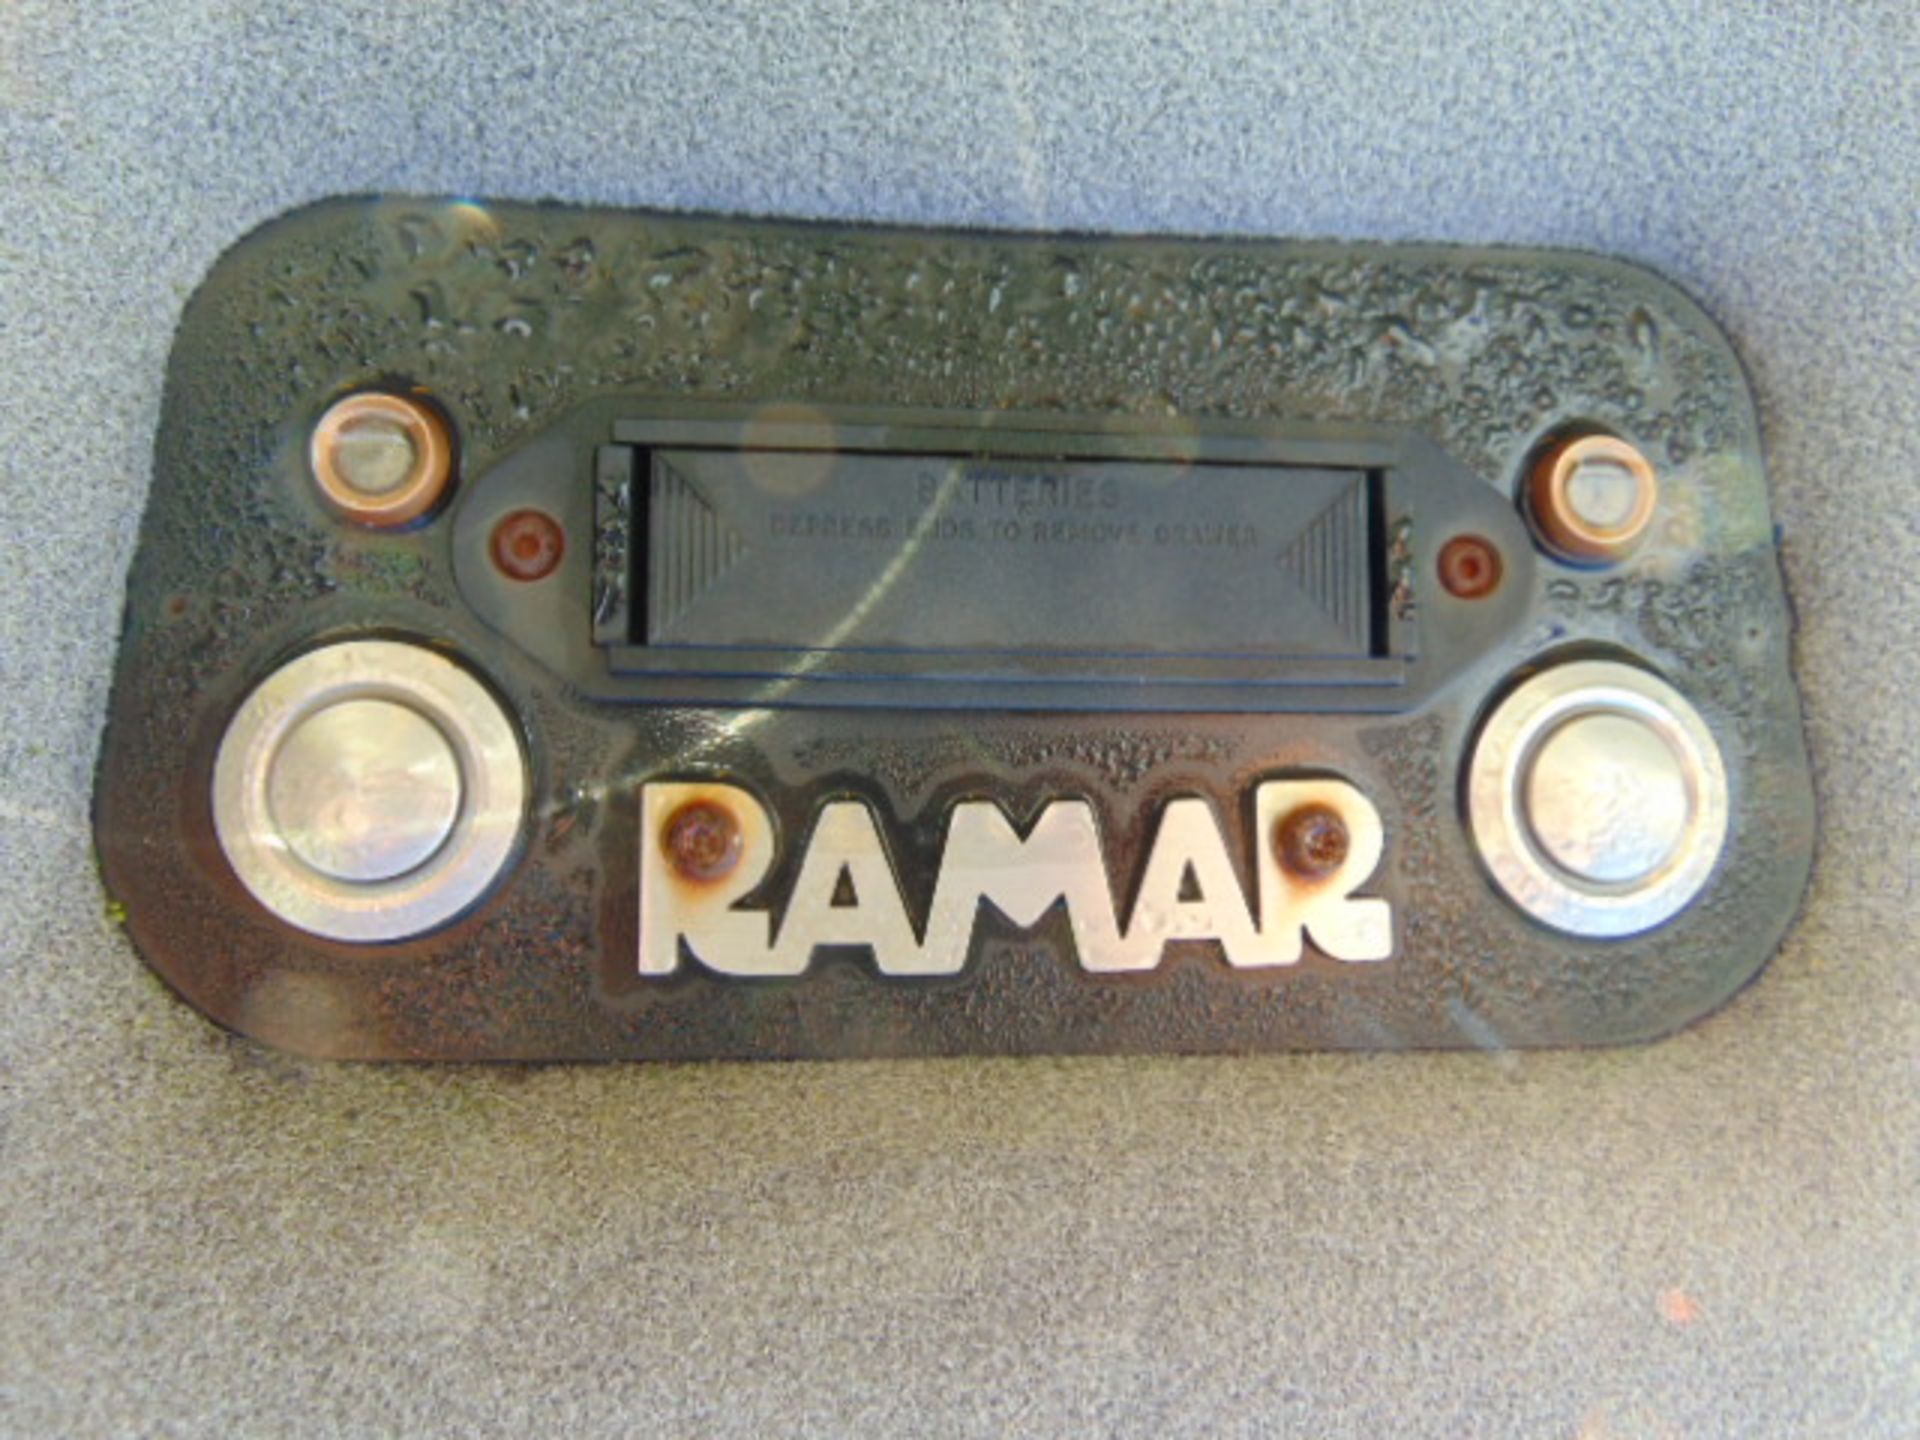 2 x Ramar In-Vehicle Weapons Security Boxes - Image 8 of 8